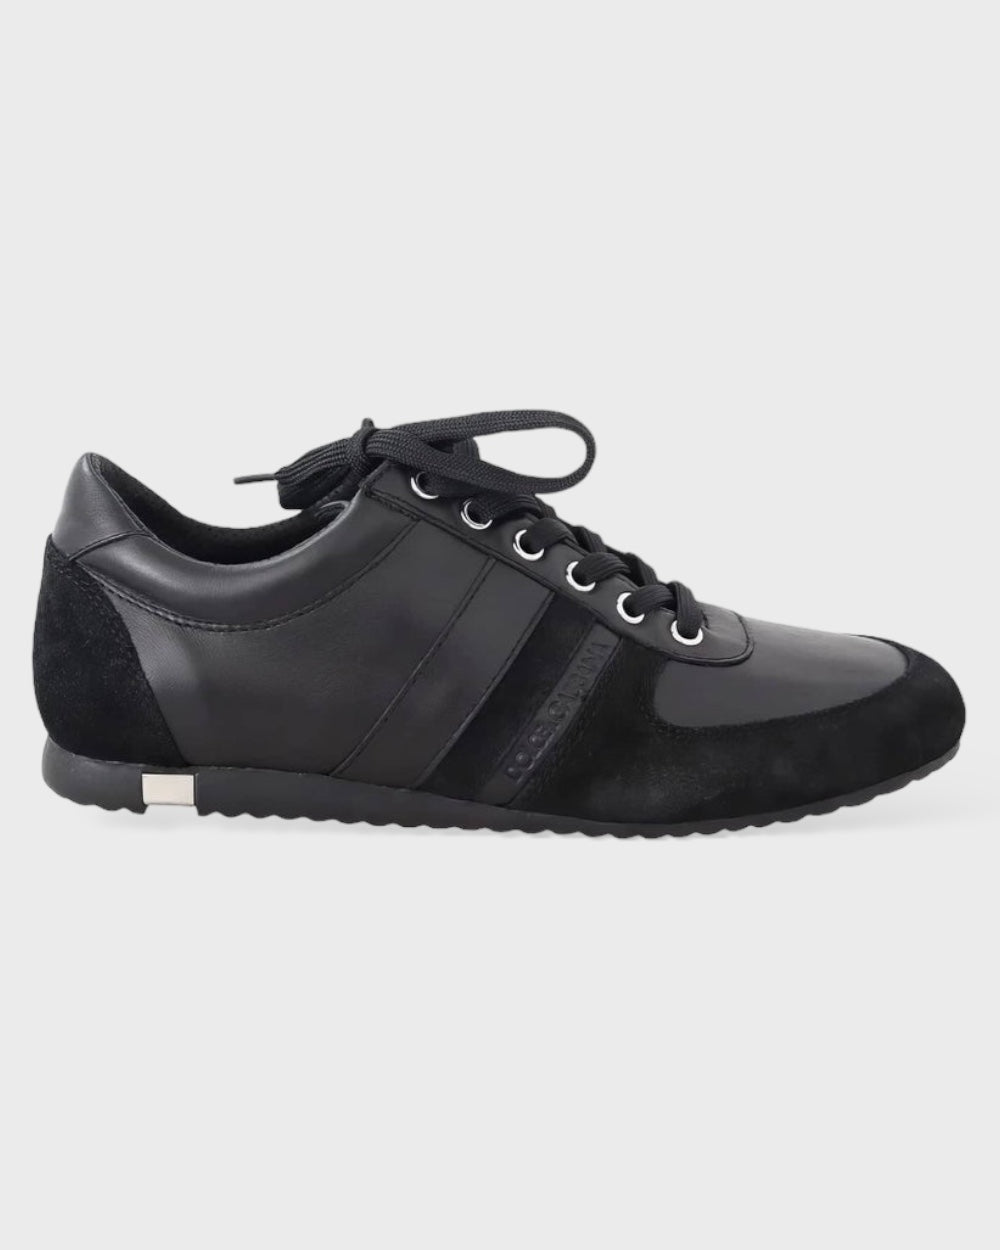 Dolce & Gabbana Black Logo Leather Casual Sneakers Shoes